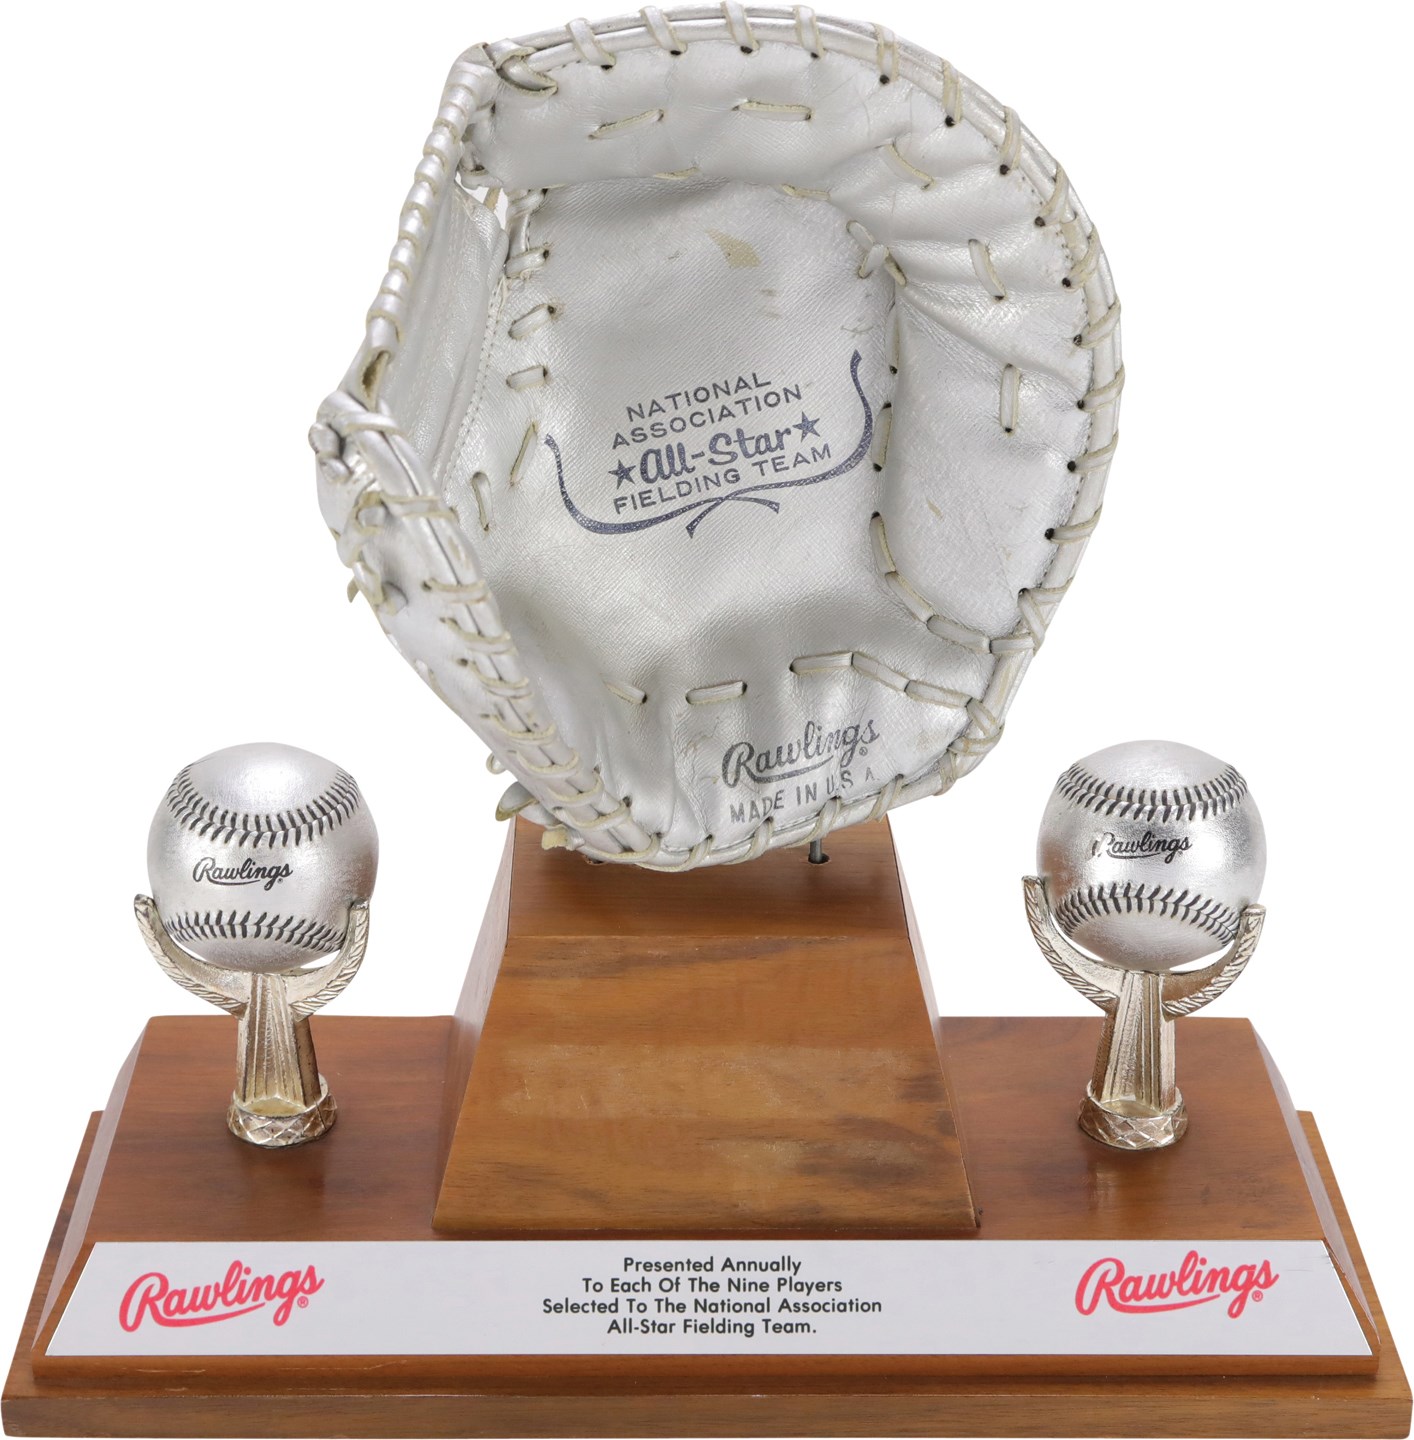 Sports Rings And Awards - National Association All-Star Fielding Team Silver Glove Award